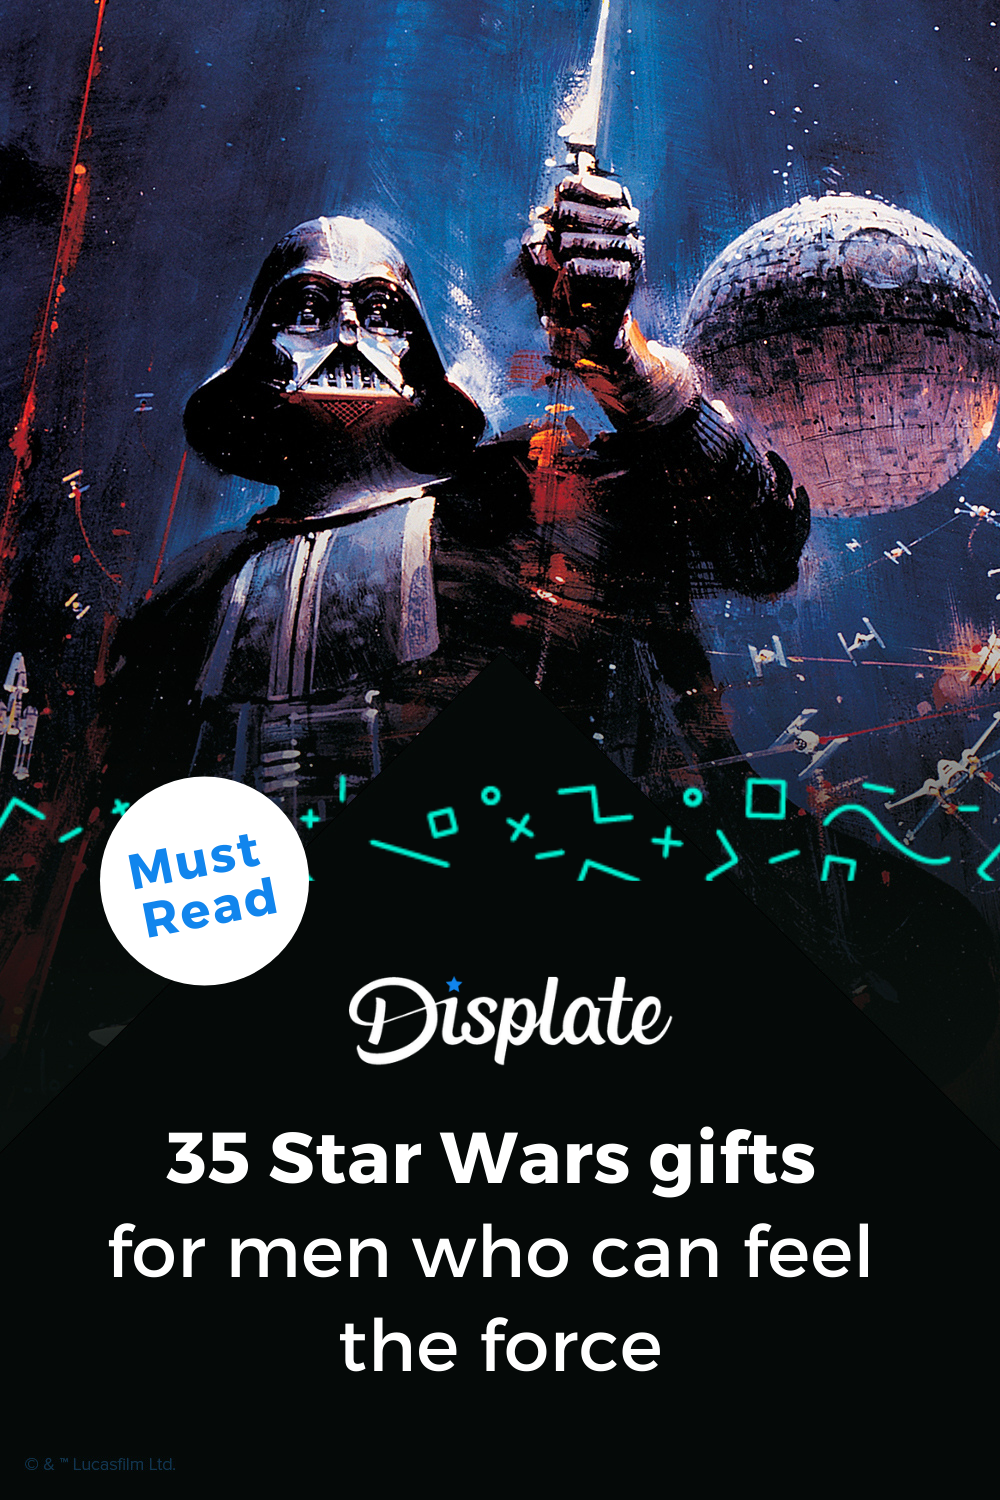 https://blog.displate.com/wp-content/uploads/2021/07/Starwars_gifts_pin.png